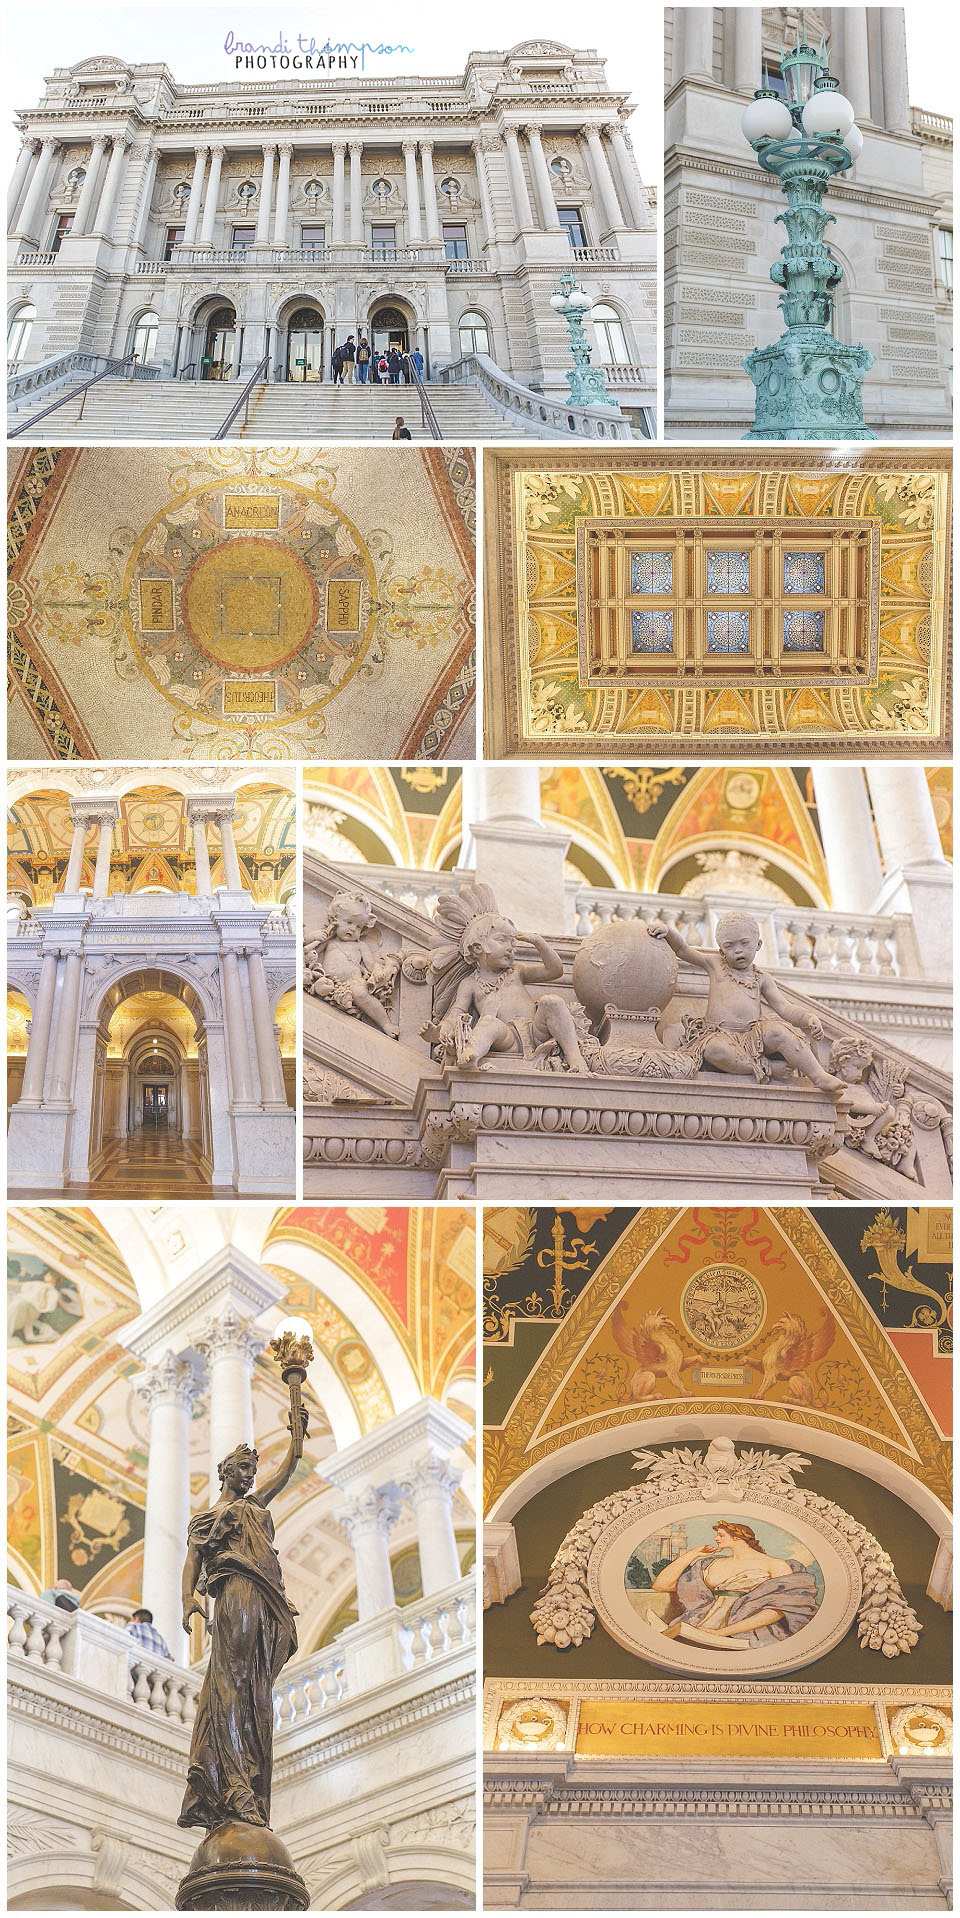 sightseeing in washington D.C., Library of Congress, building details